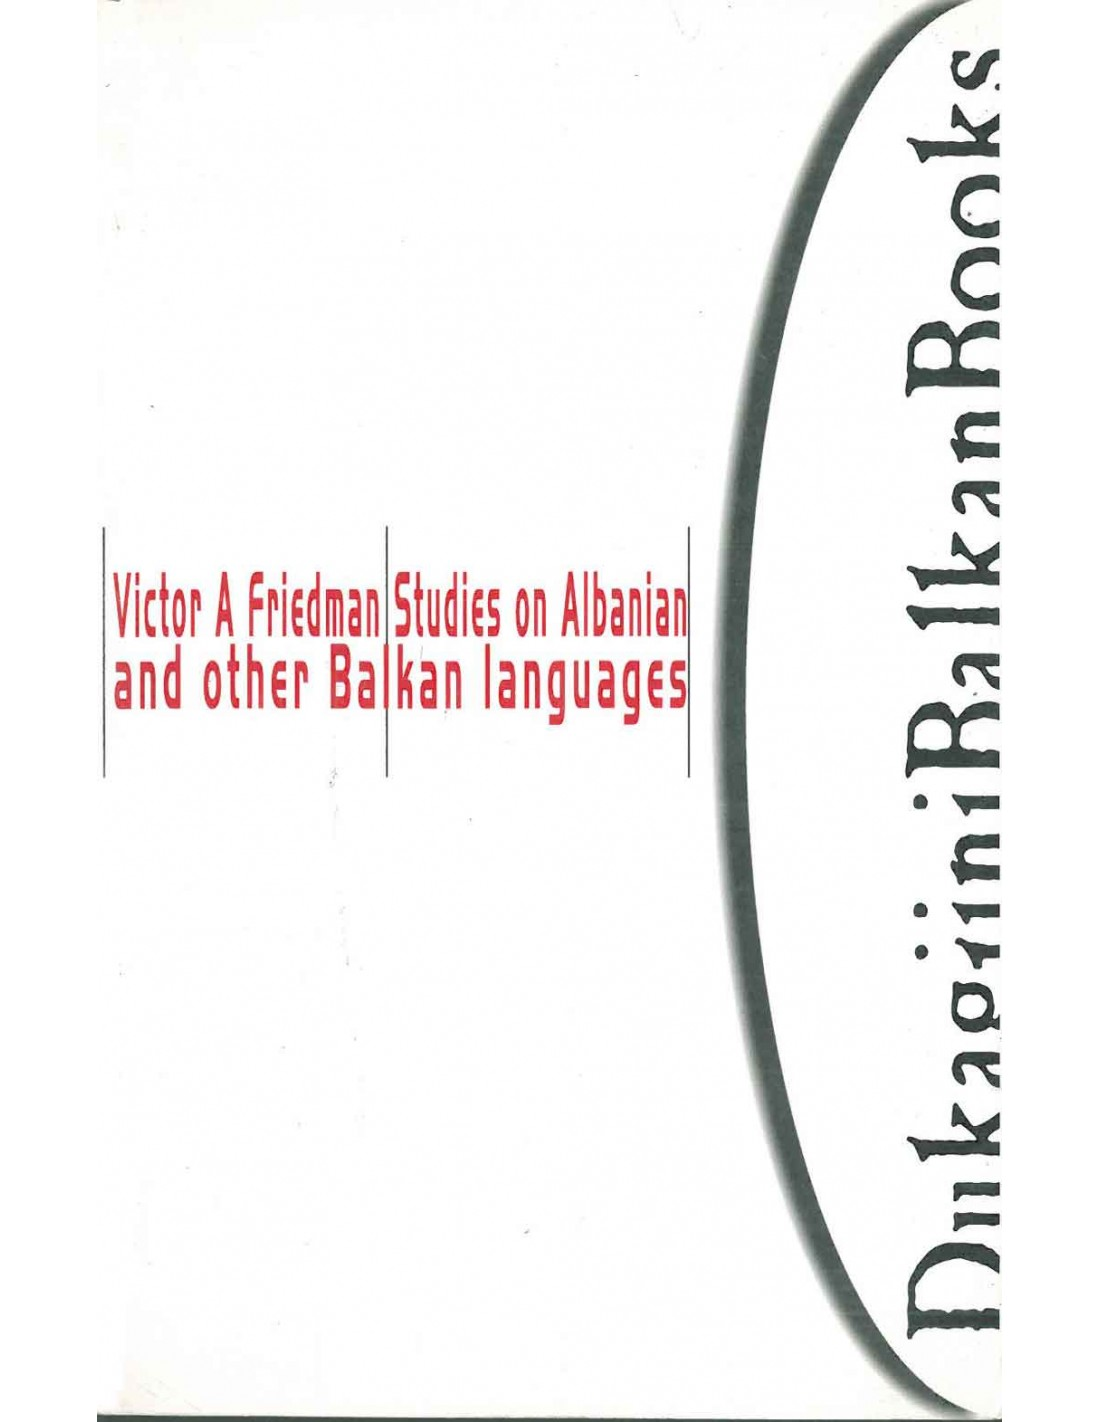 Studies on Albania and other Balkan languages